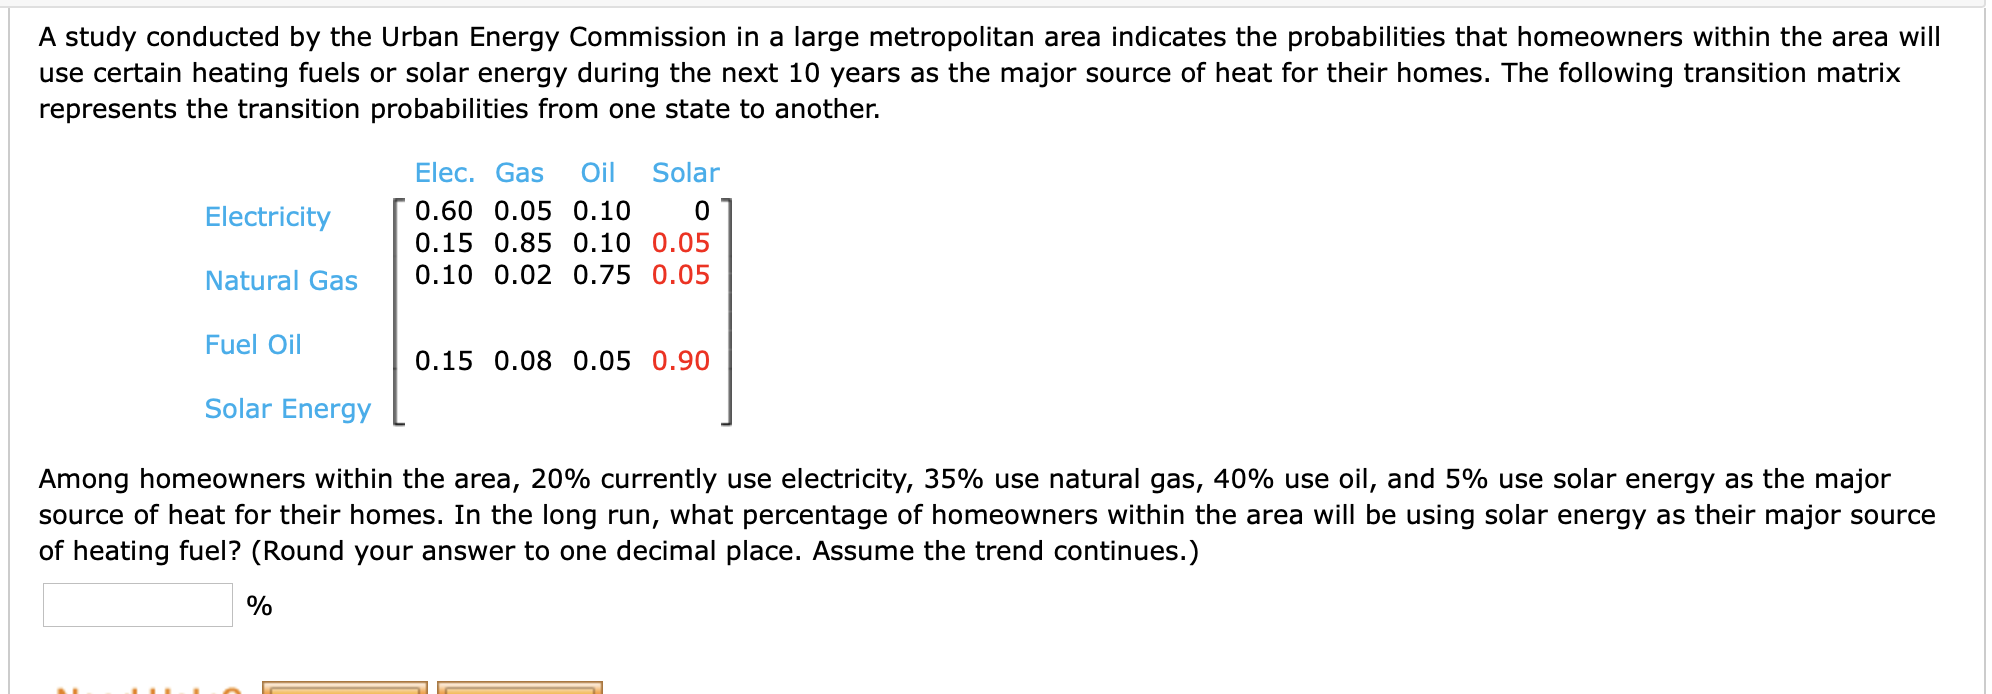 A study conducted by the Urban Energy Commission in a large metropolitan area indicates the probabilities that homeowners within the area will
use certain heating fuels or solar energy during the next 10 years as the major source of heat for their homes. The following transition matrix
represents the transition probabilities from one state to another.
Elec. Gas
Oil
Solar
Electricity
0.60 0.05 0.10
0.15 0.85 0.10 0.05
